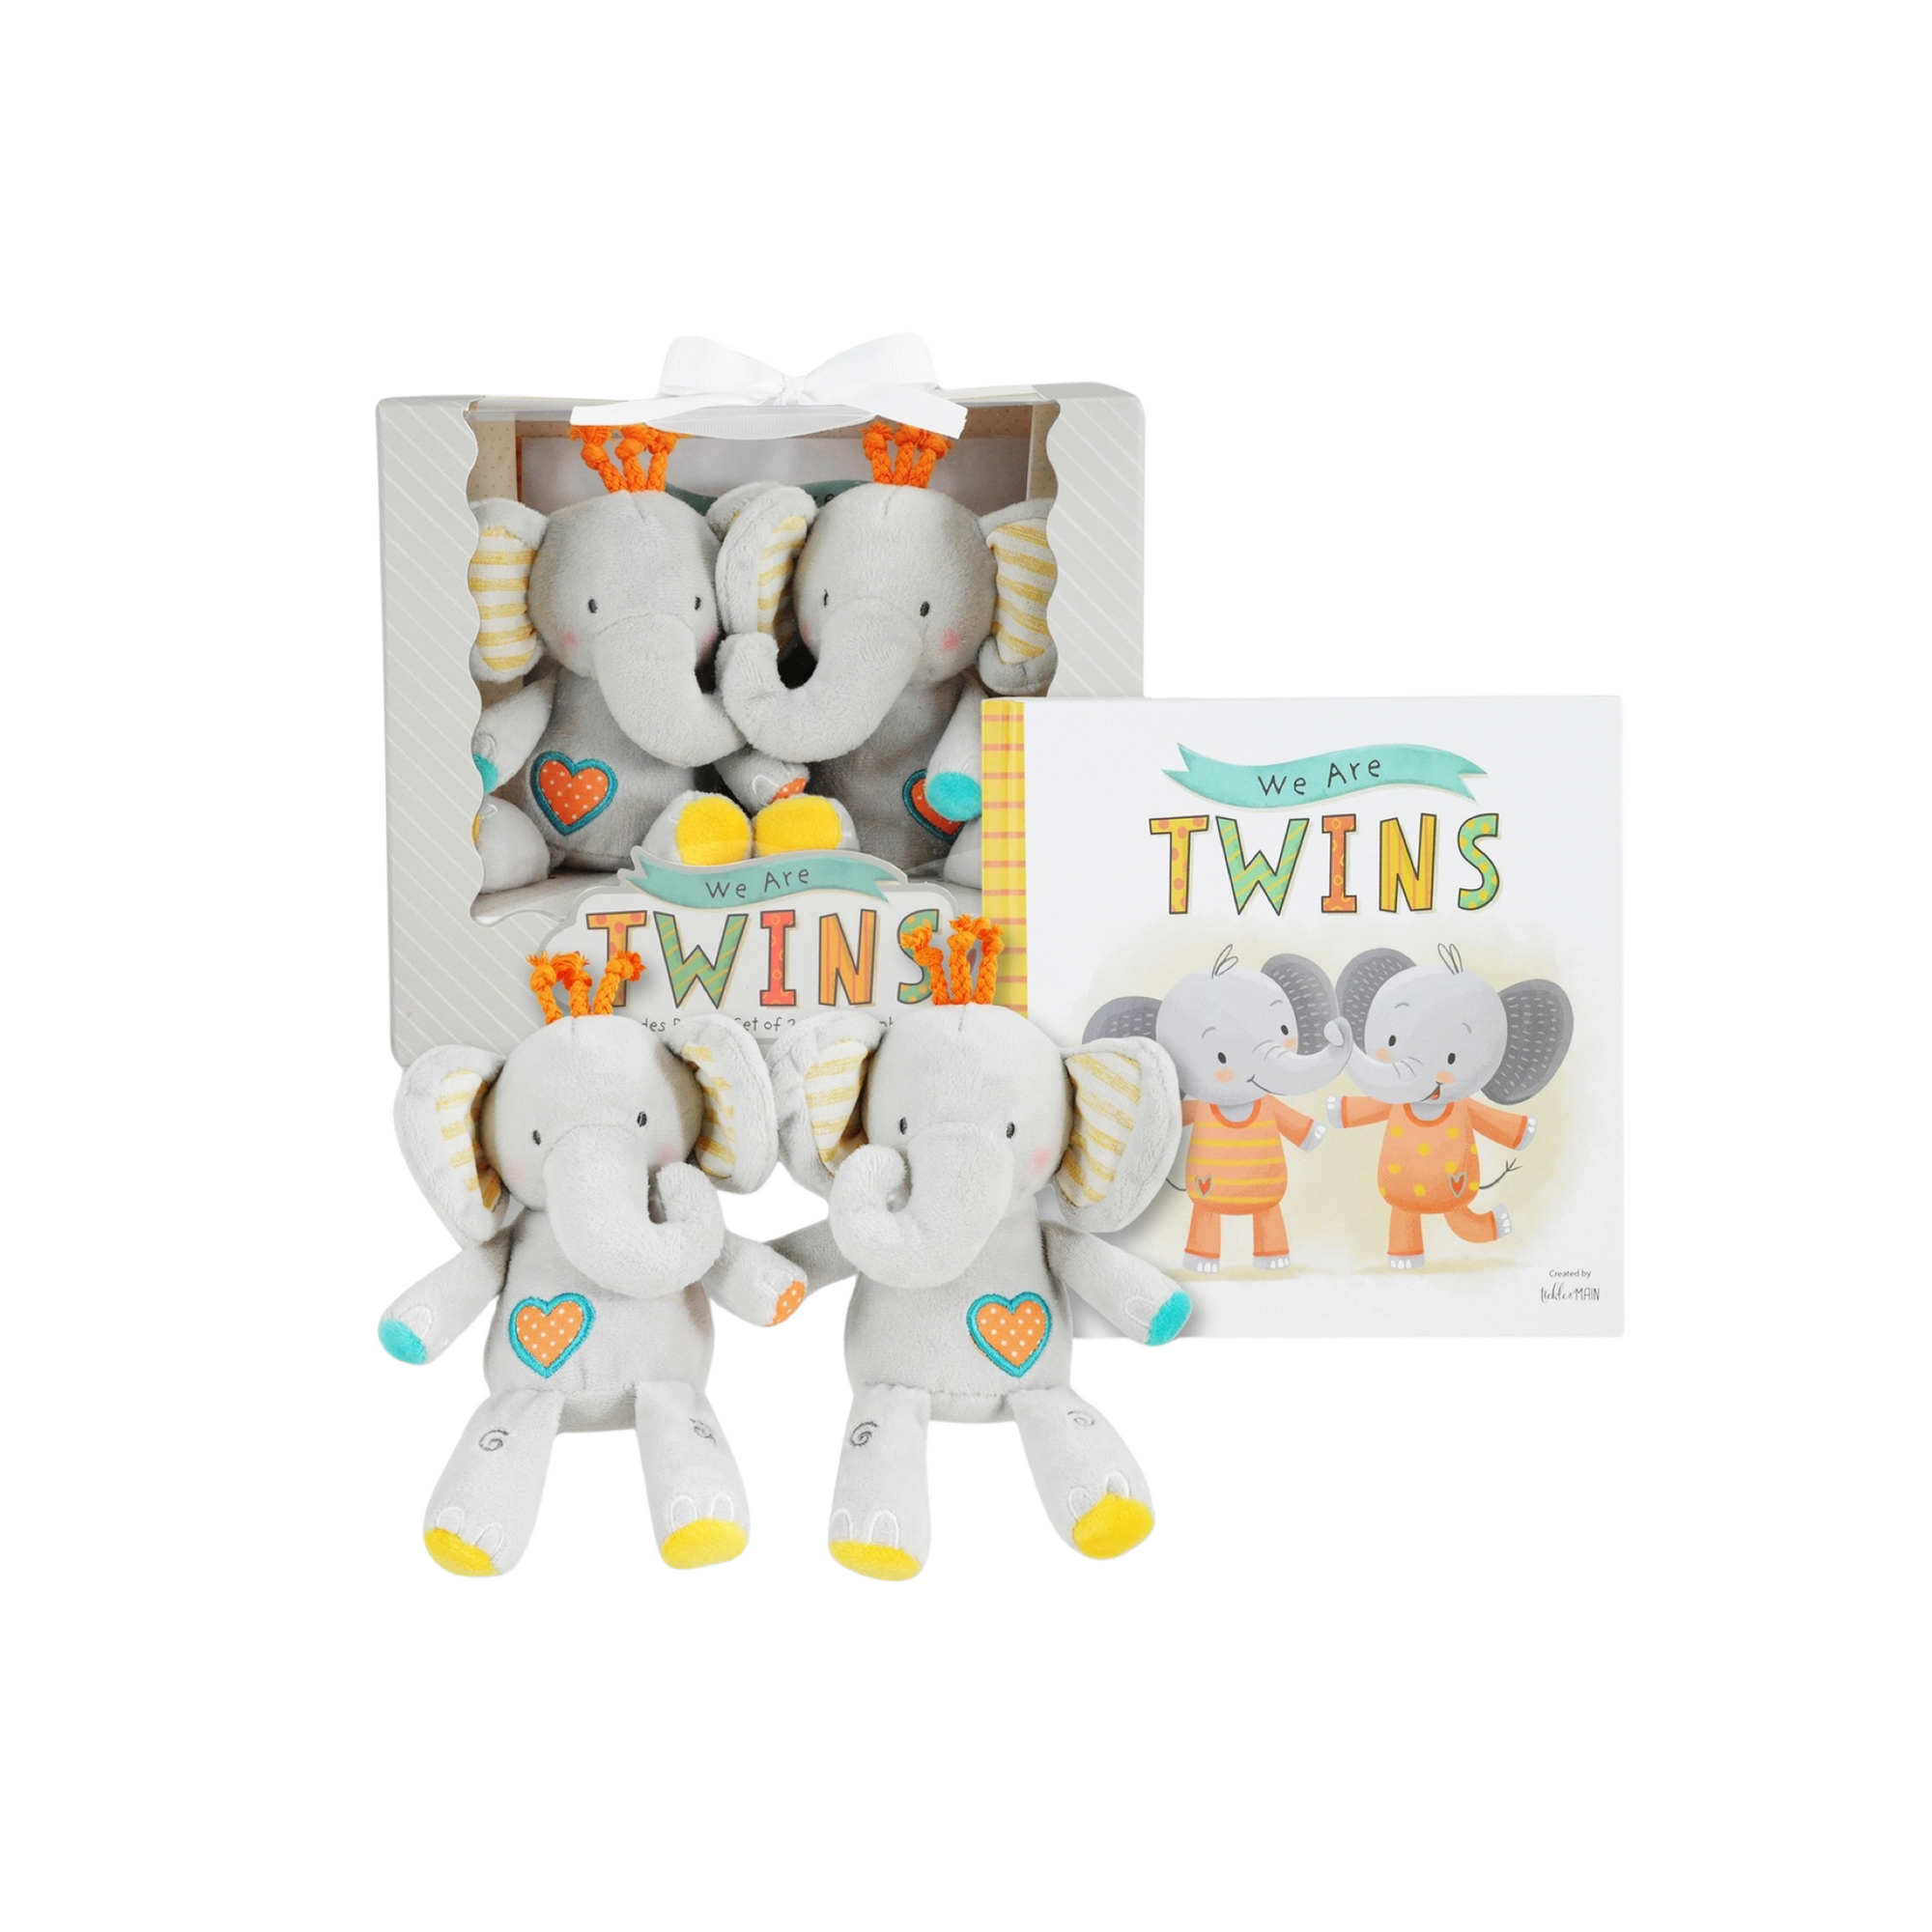 We Are Twins Gift Set & Book